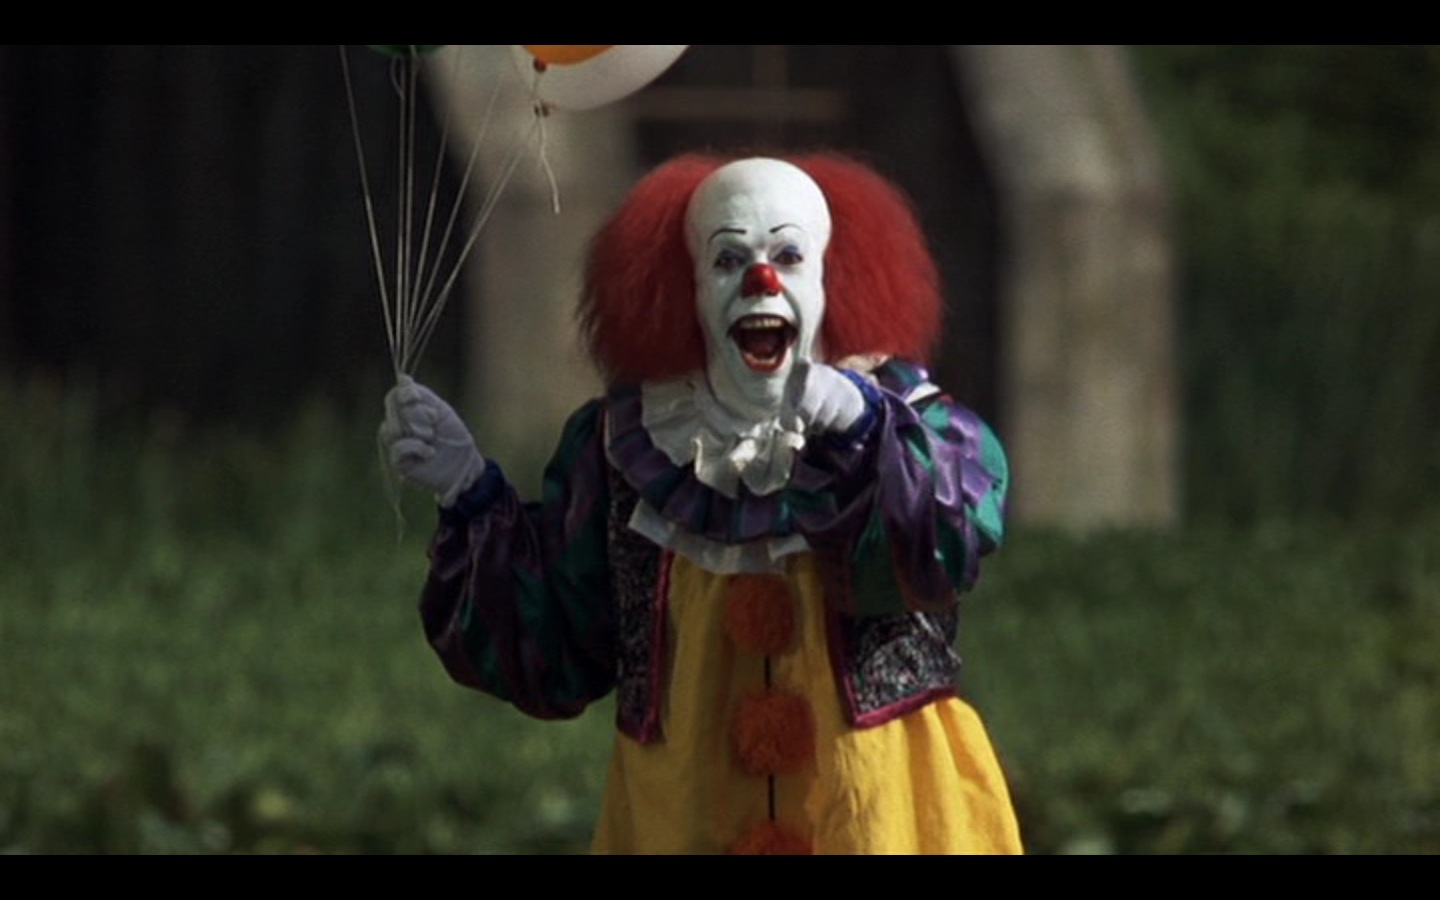 Stephen King S It Remake Casts Pennywise The Clown Den Of Geek